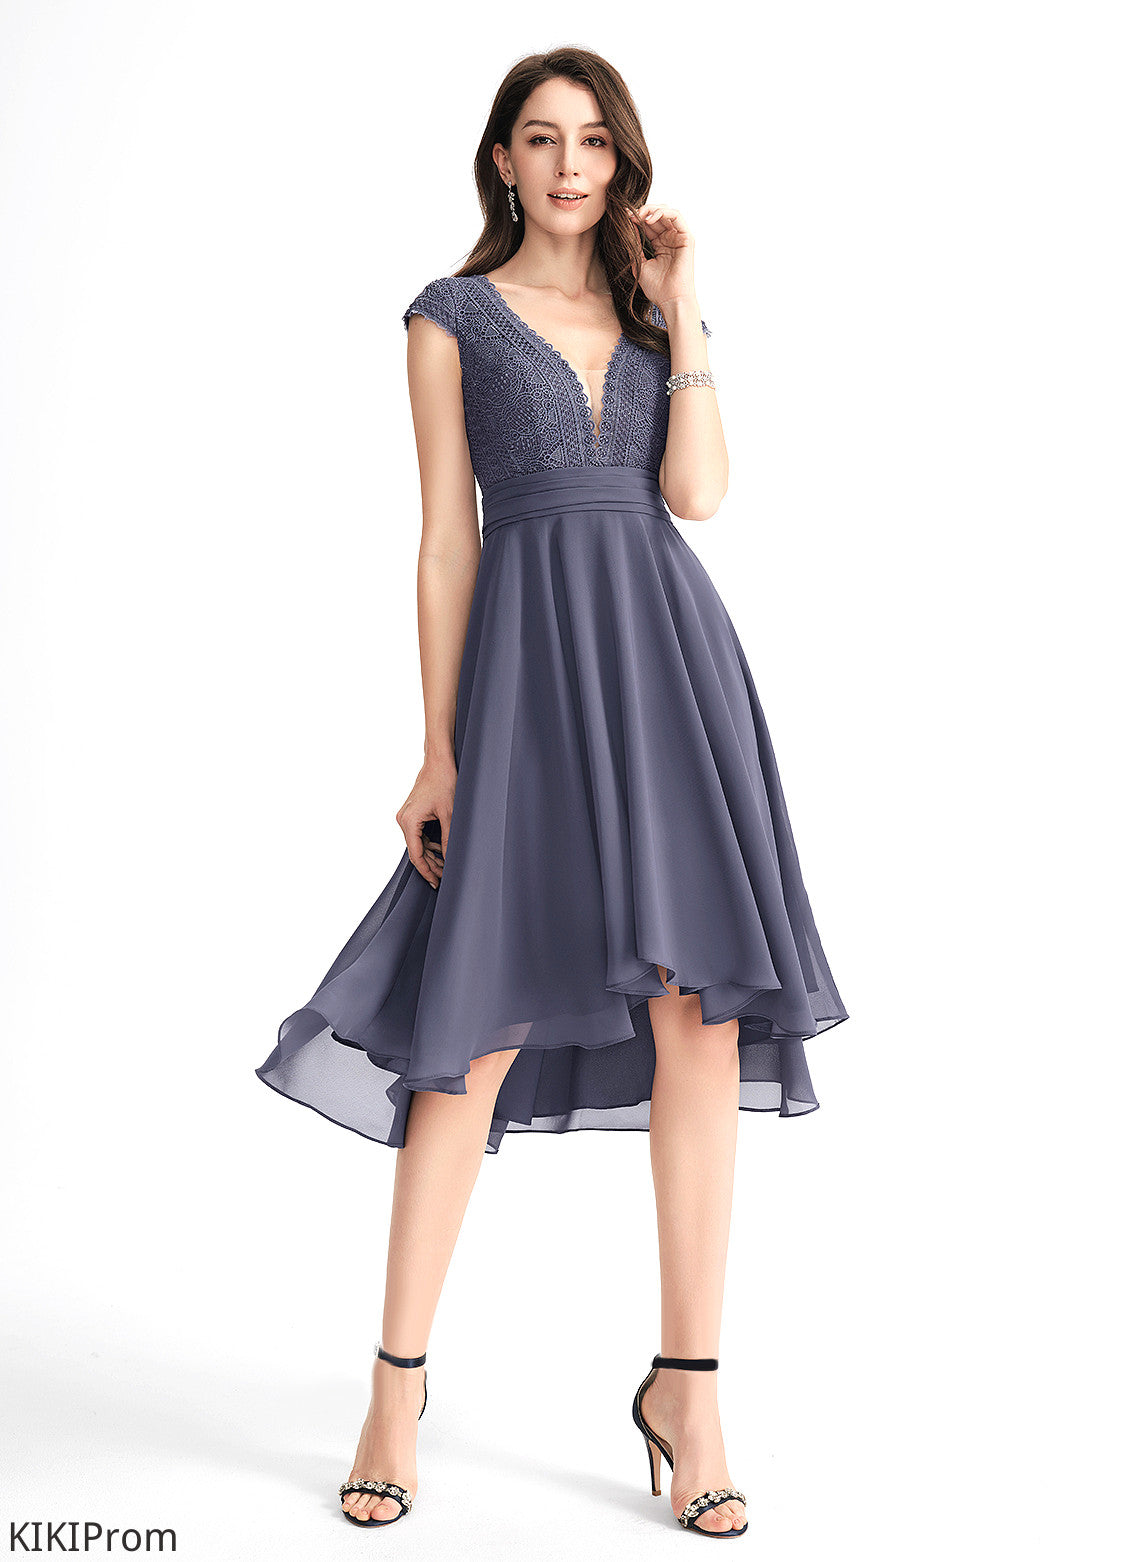 Cocktail Cocktail Dresses Chiffon Lace Logan A-Line With Pleated V-neck Dress Asymmetrical